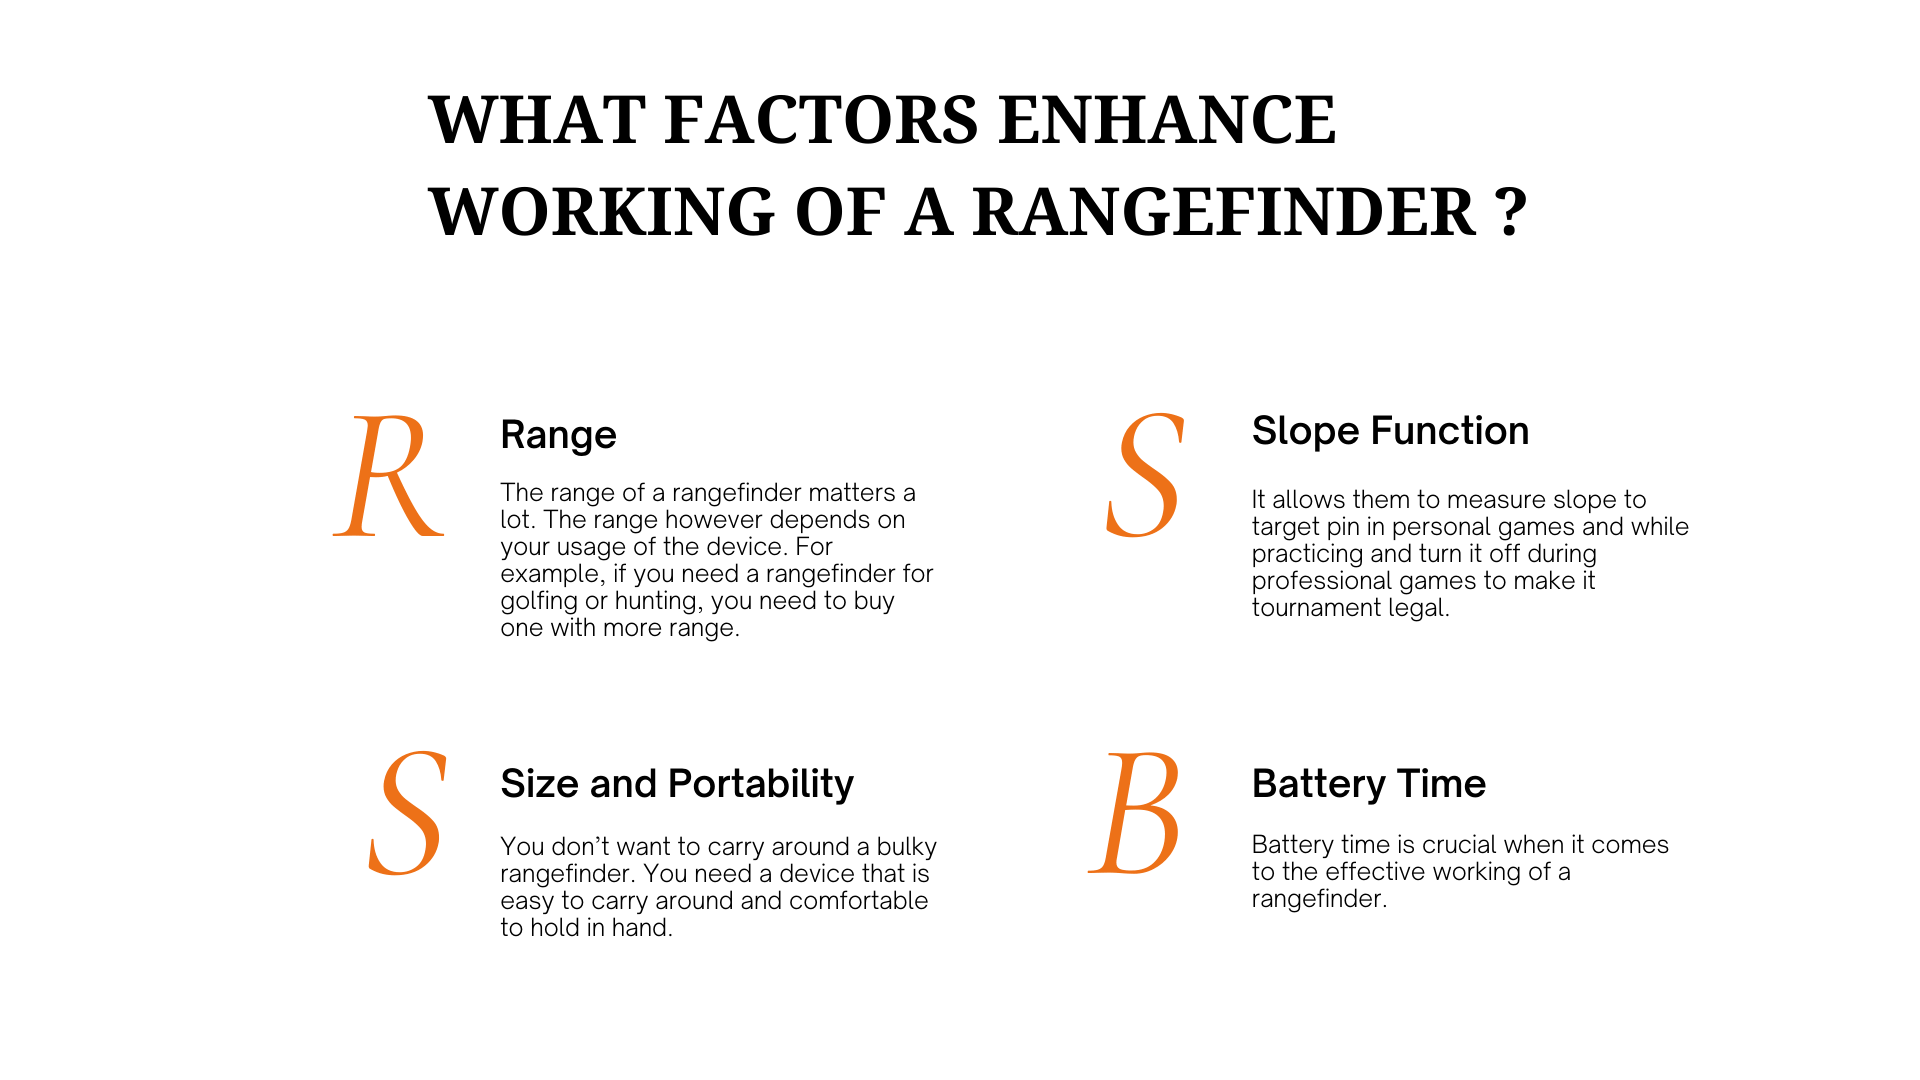 What Factors Enhance Working of a Rangefinder